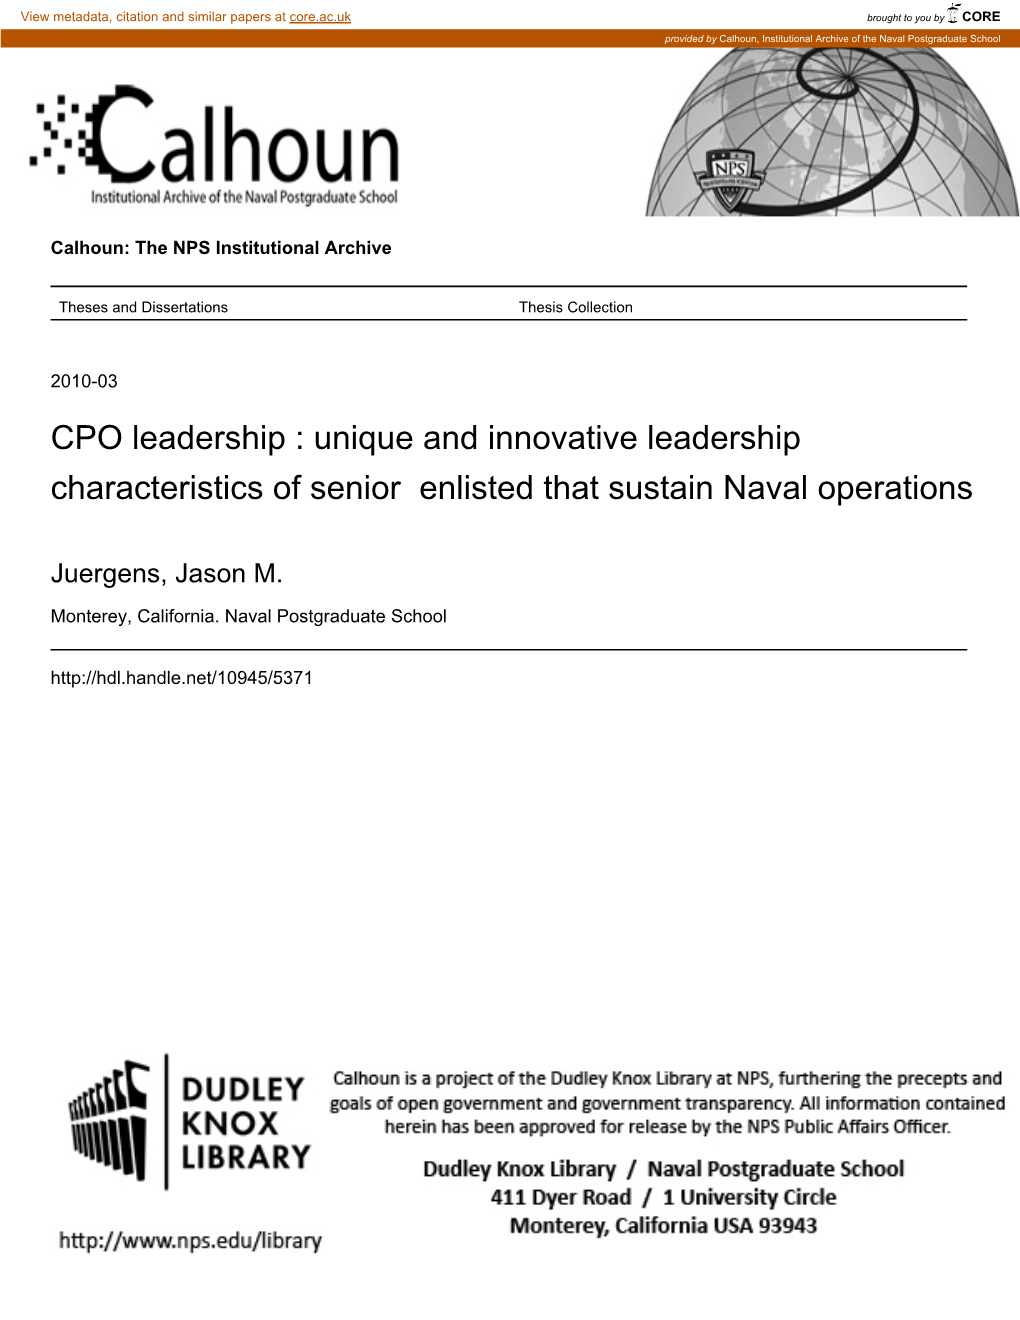 Unique and Innovative Leadership Characteristics of Senior Enlisted That Sustain Naval Operations